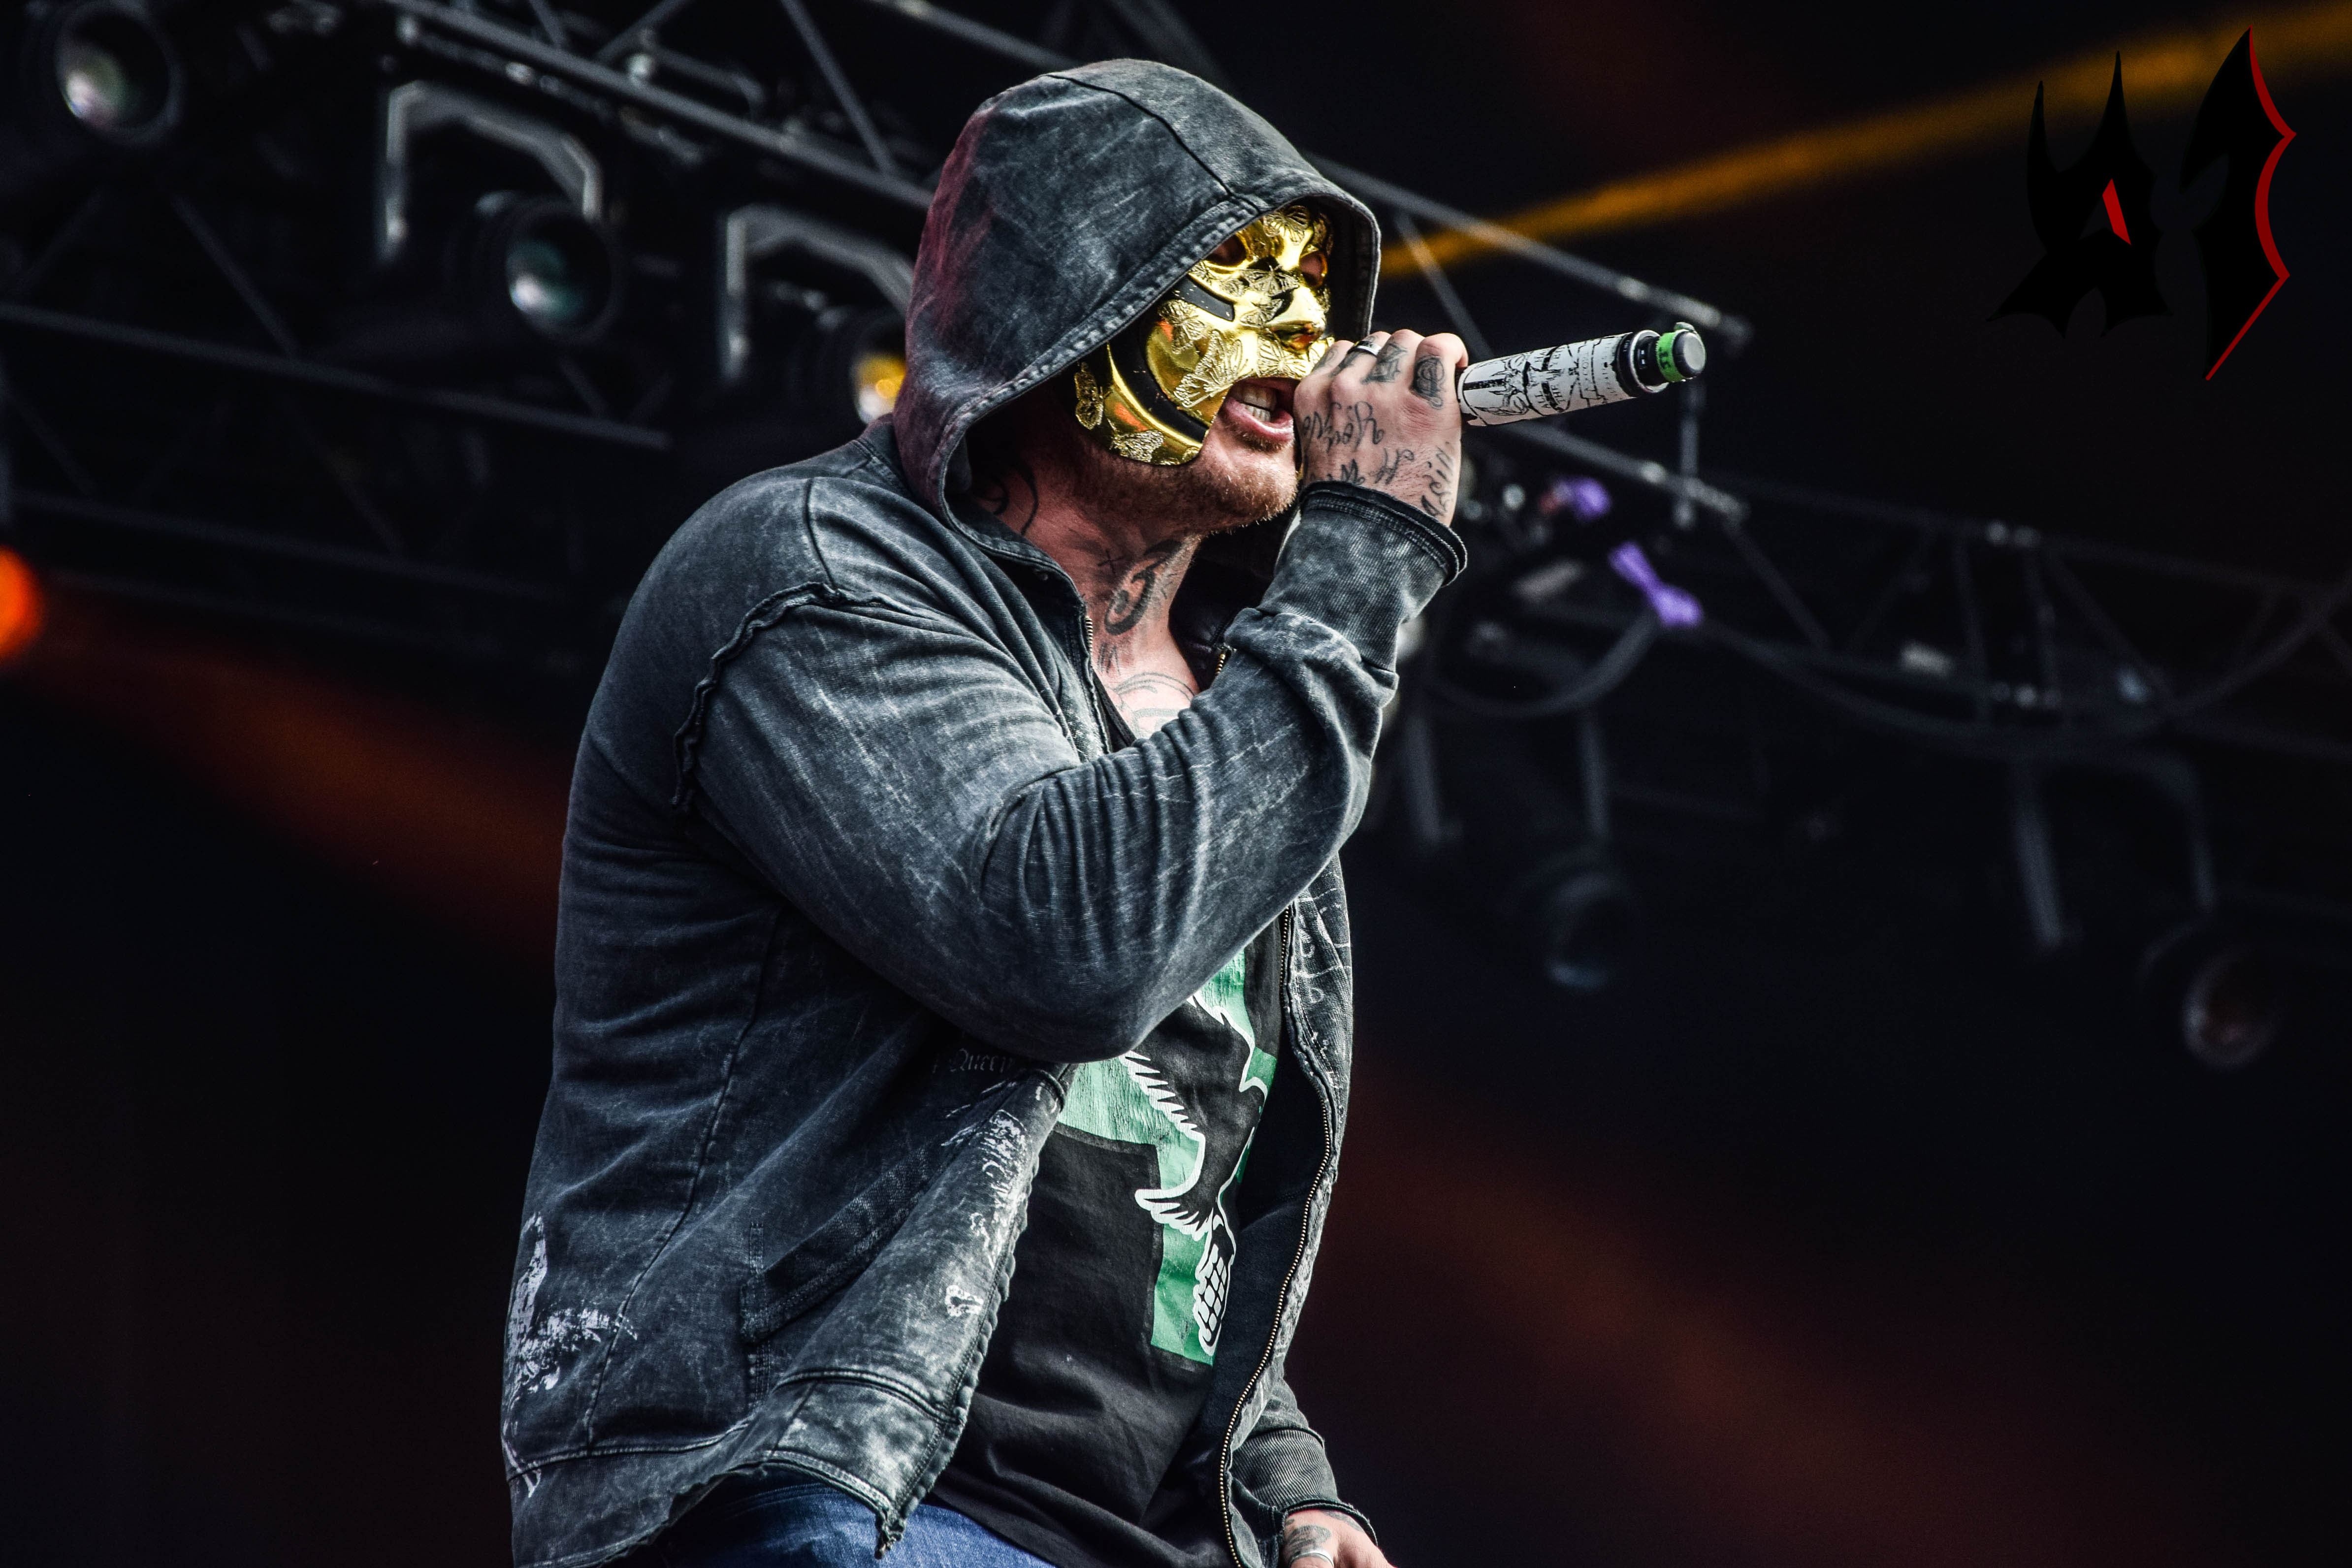 Donwload 2018 – Day 2 - Hollywood Undead 10